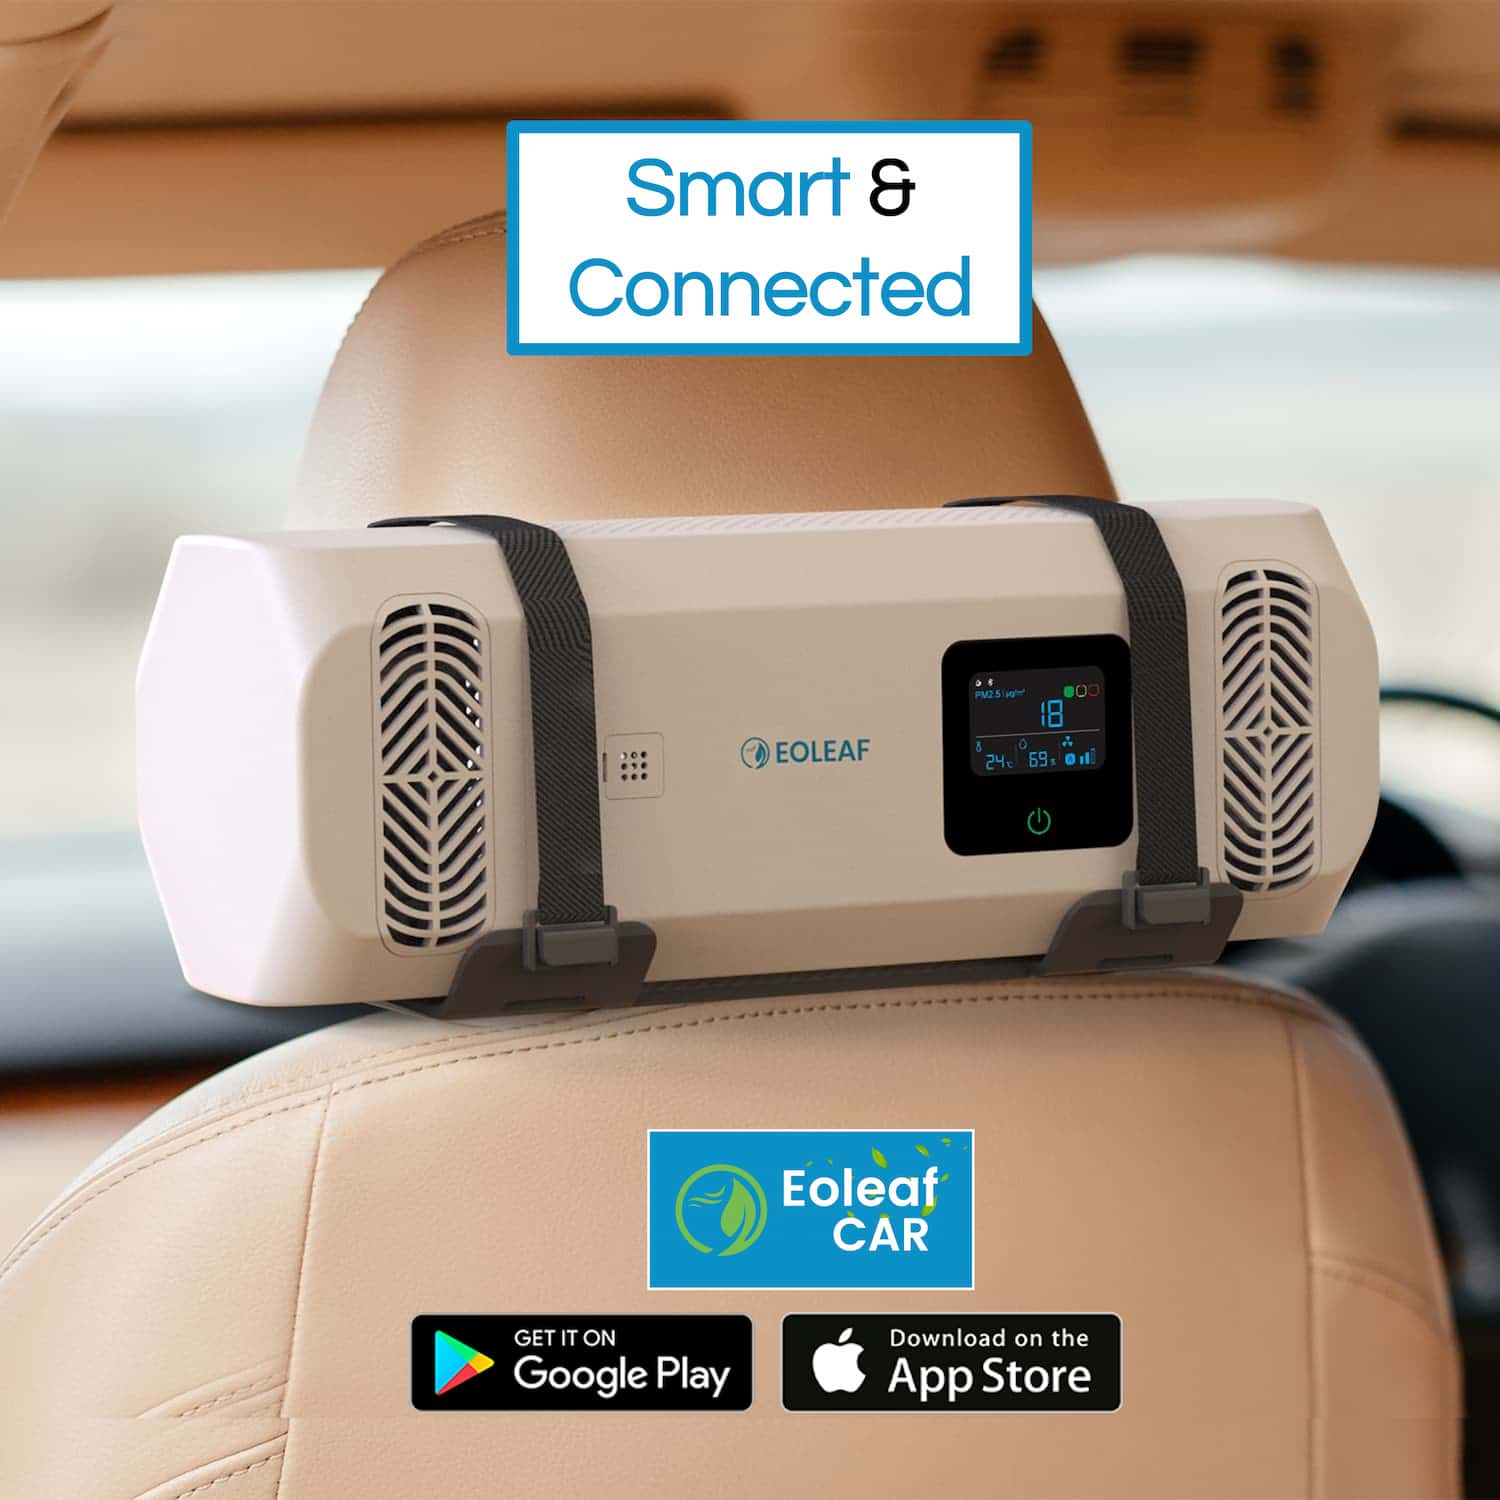 Smart car air purifier - Bluetooth capable - Connects to smartphone app 